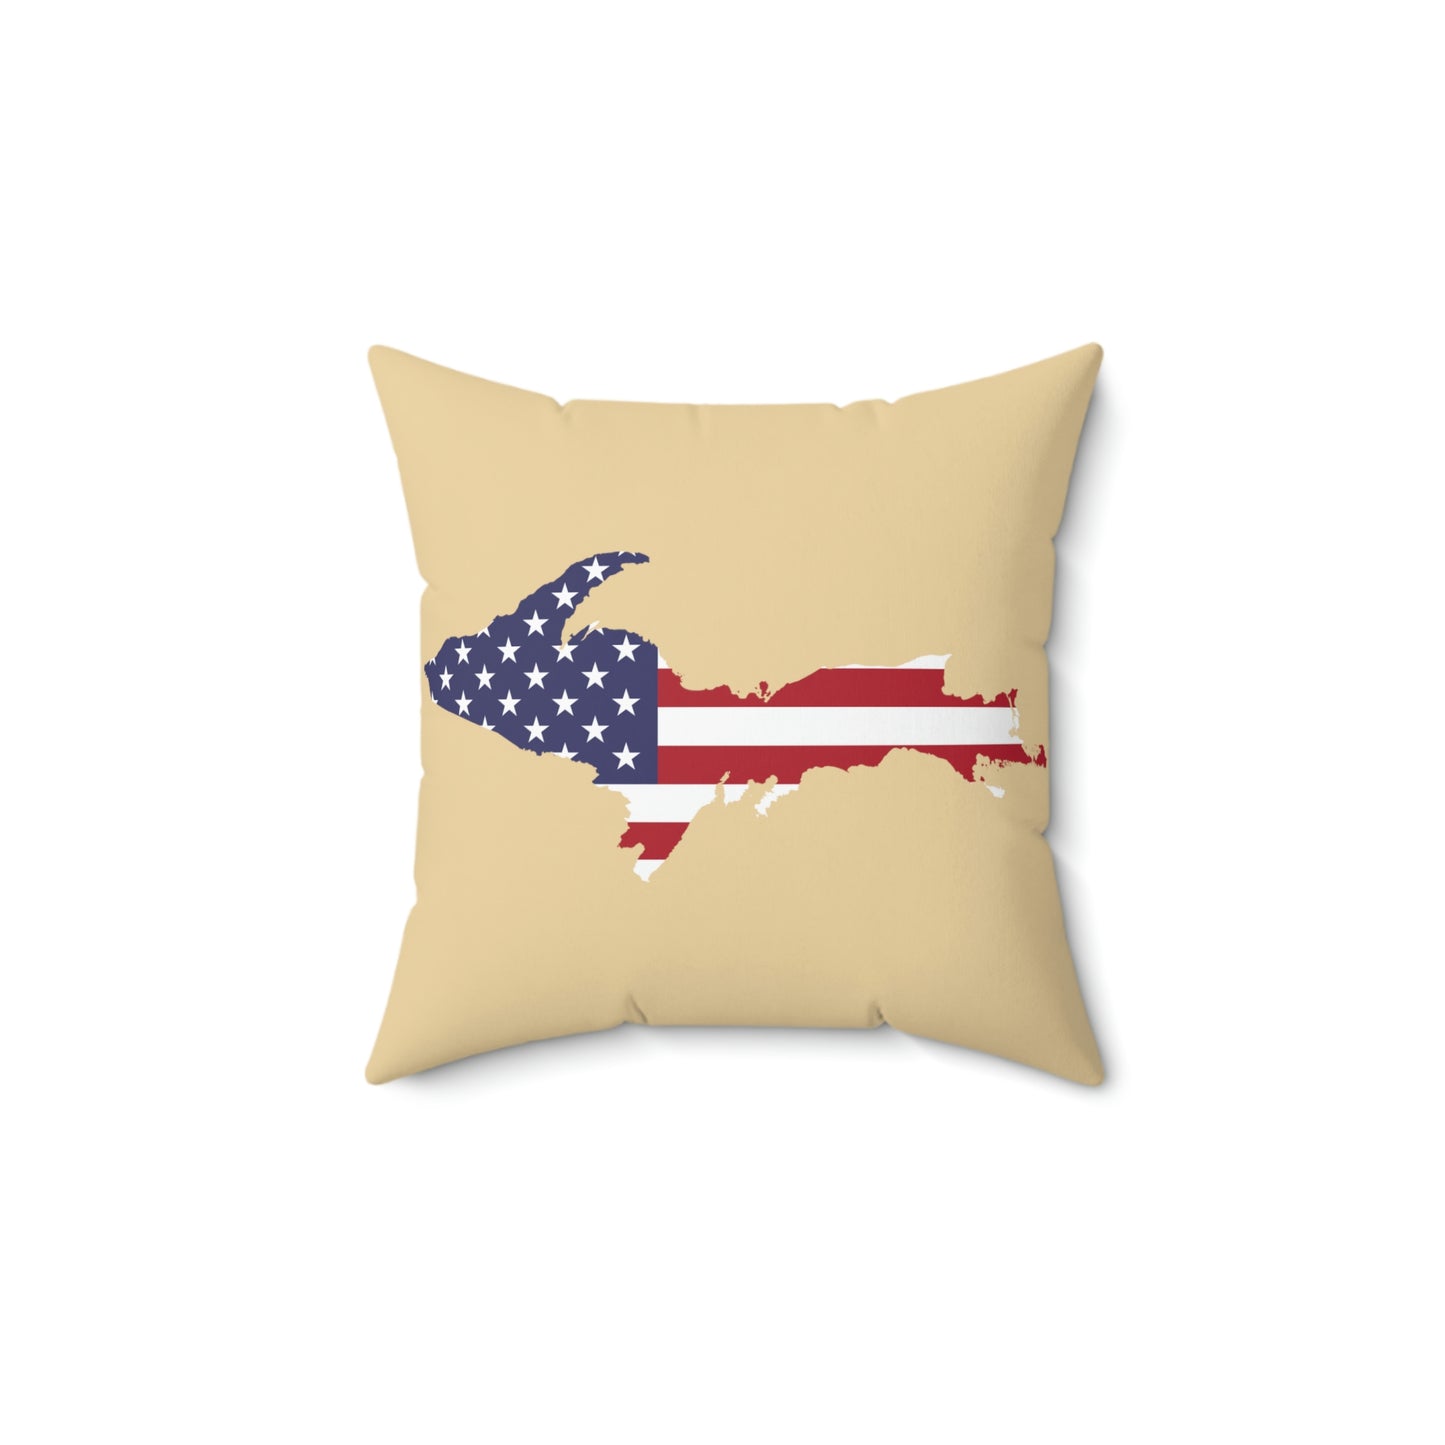 Michigan Upper Peninsula Accent Pillow (w/ UP USA Flag Outline) | Maple Color